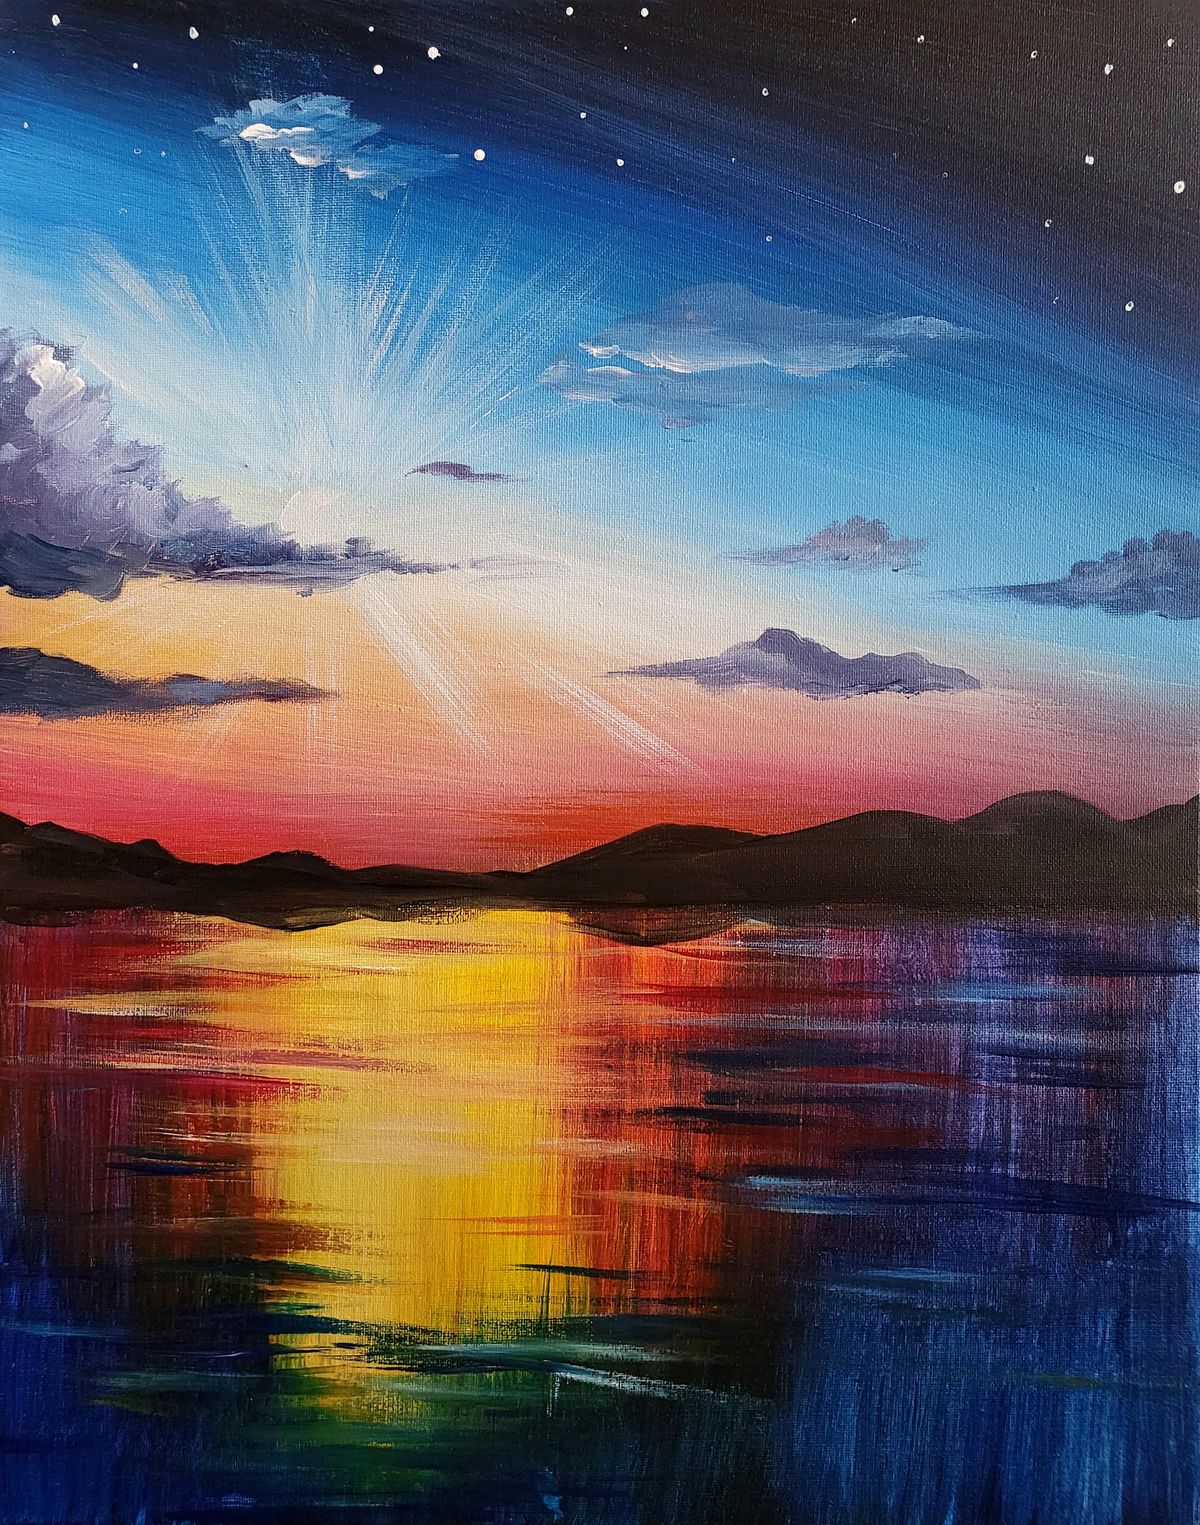 The BEST Paint and Sip Night with Coco, "Magical Sight"